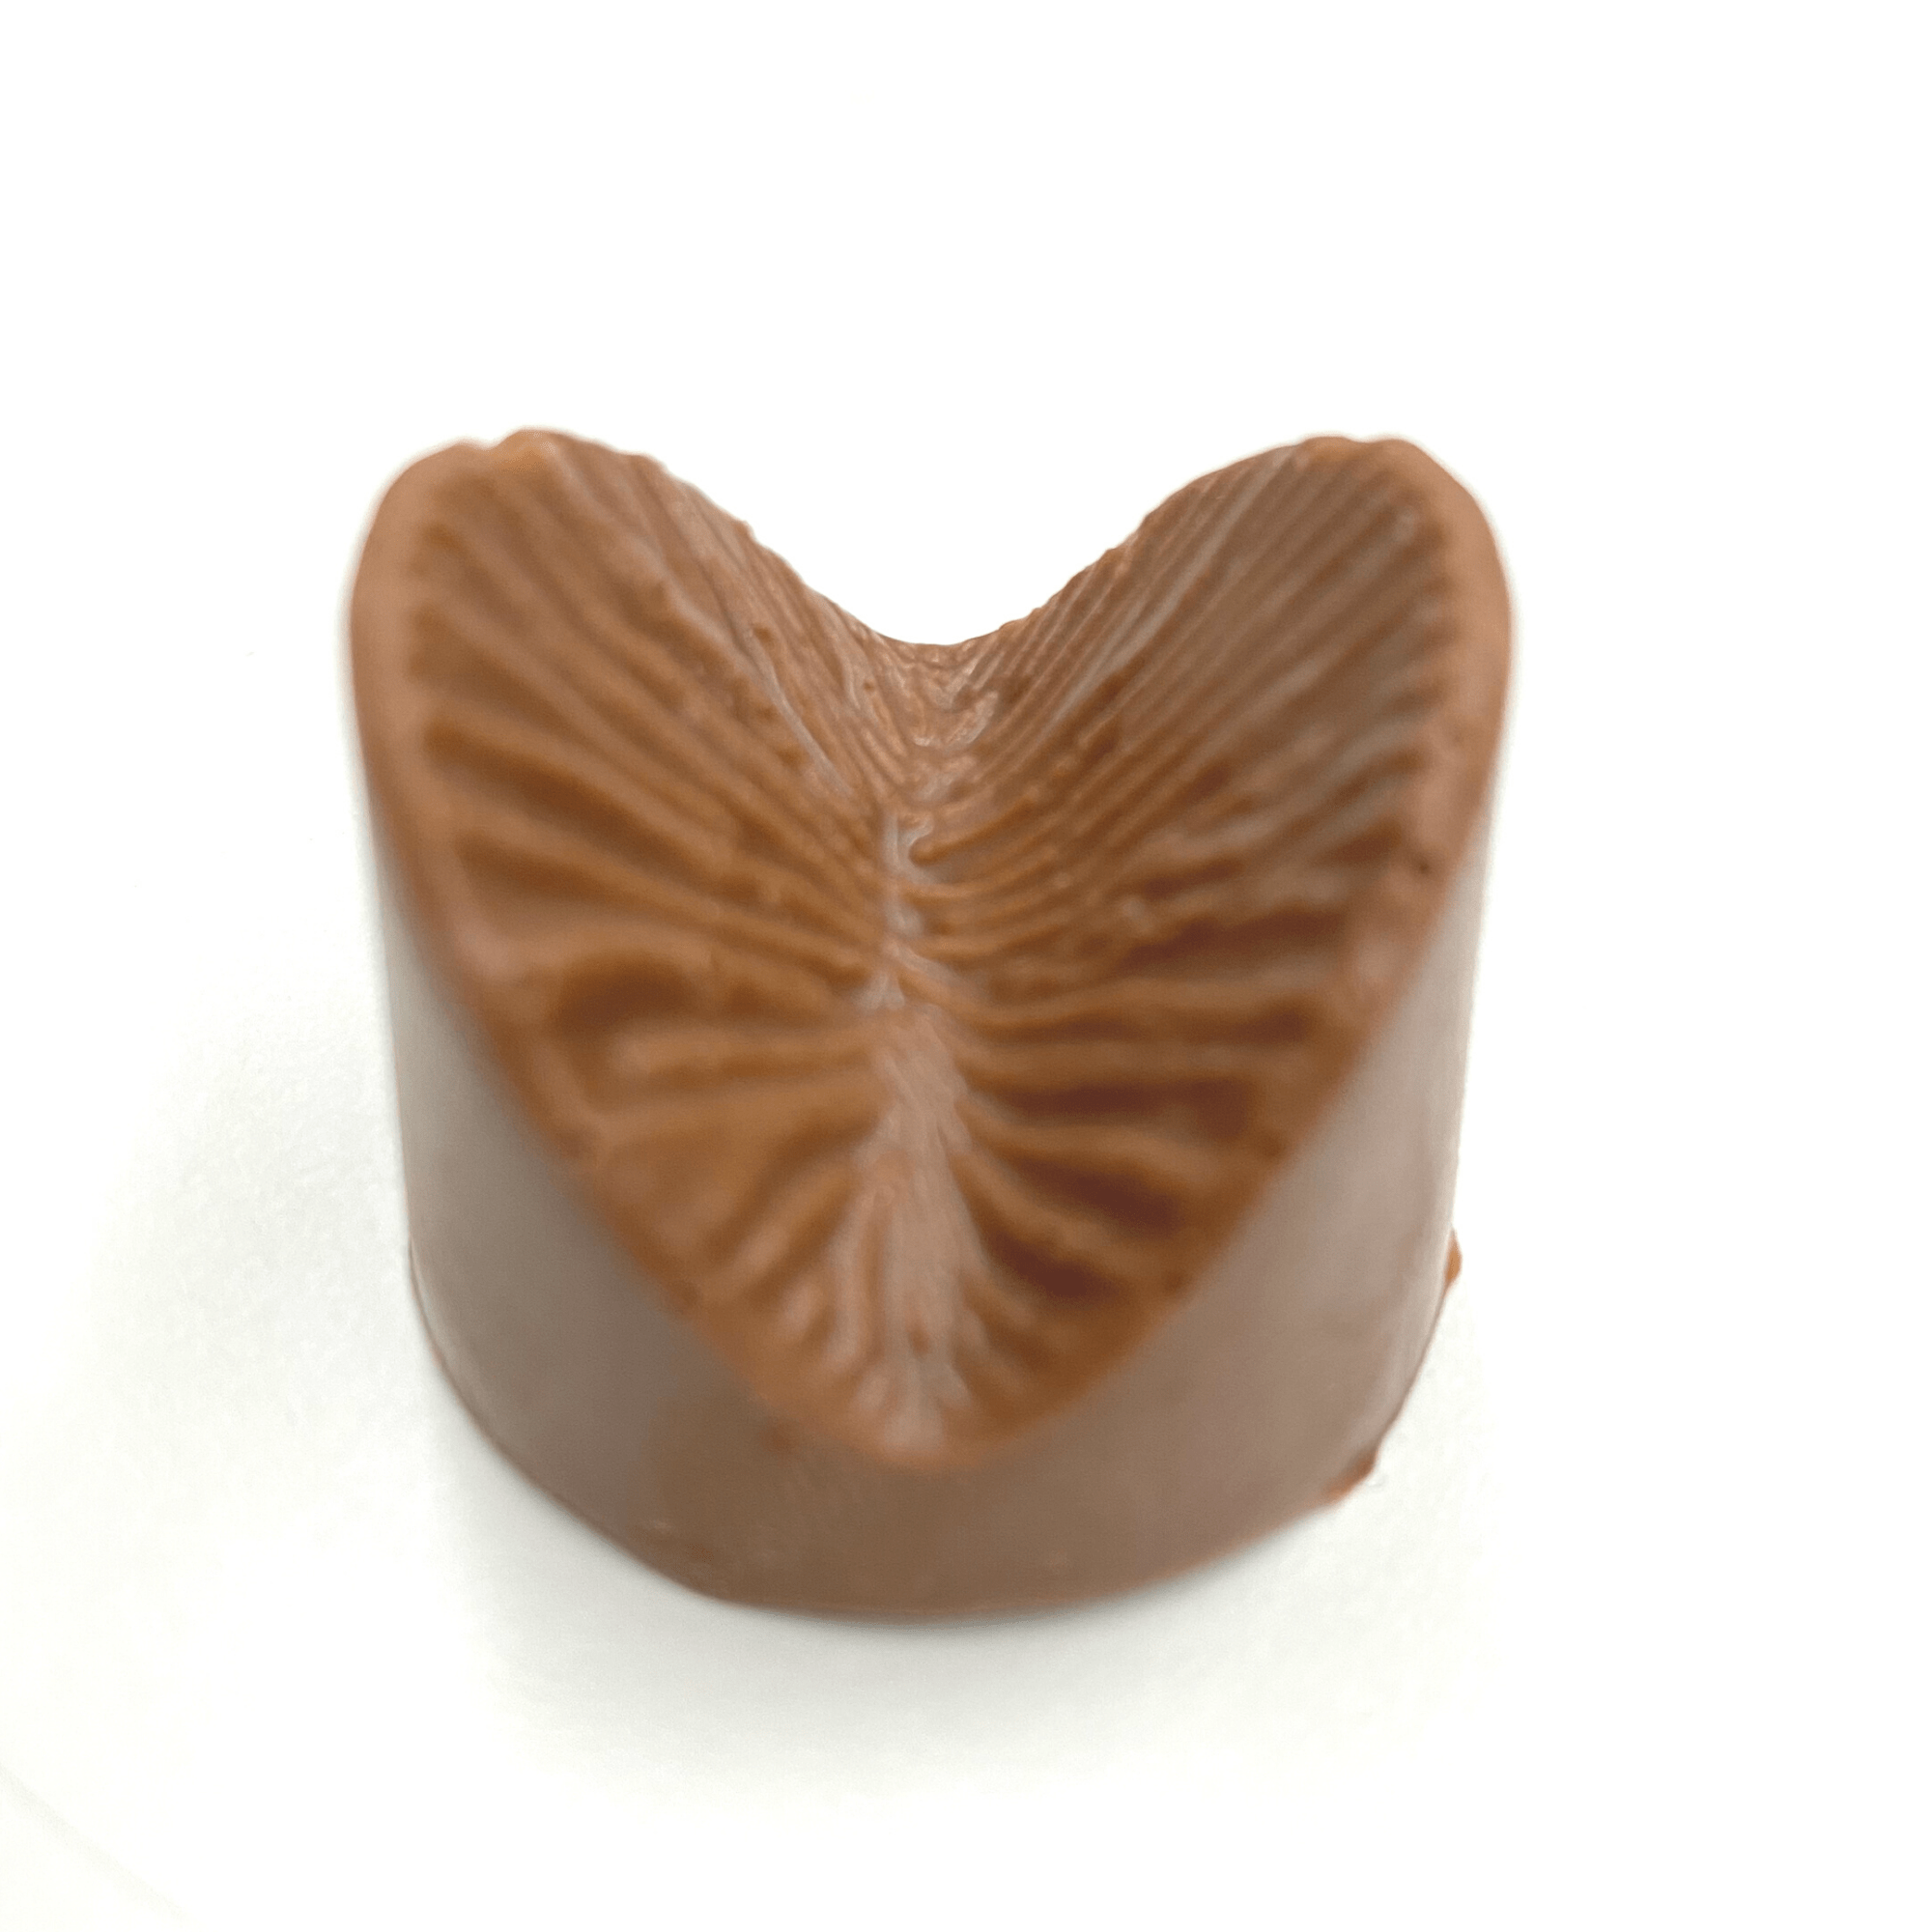 Edible Anus, The Funniest Chocolate Gift, 100% anonymous